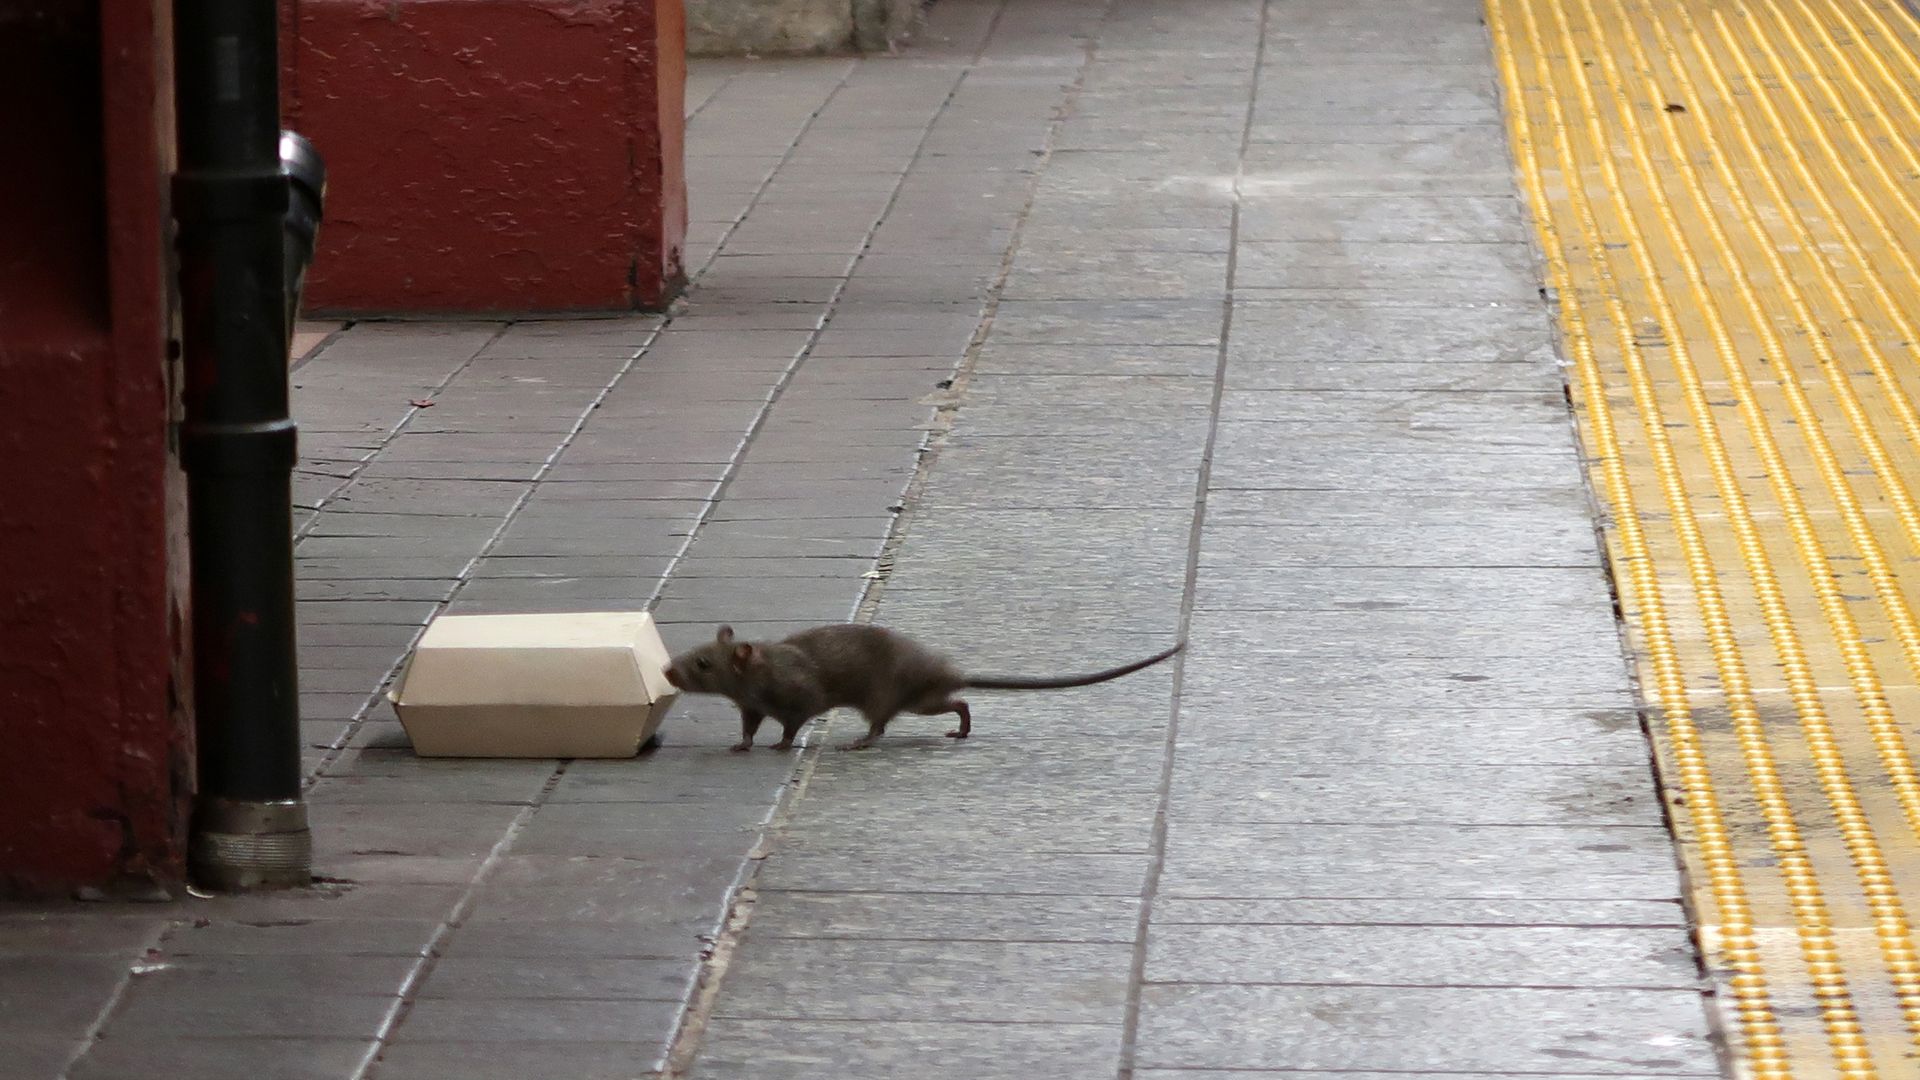 A photo of a rat sniffing a box with food in it on a subway platform.